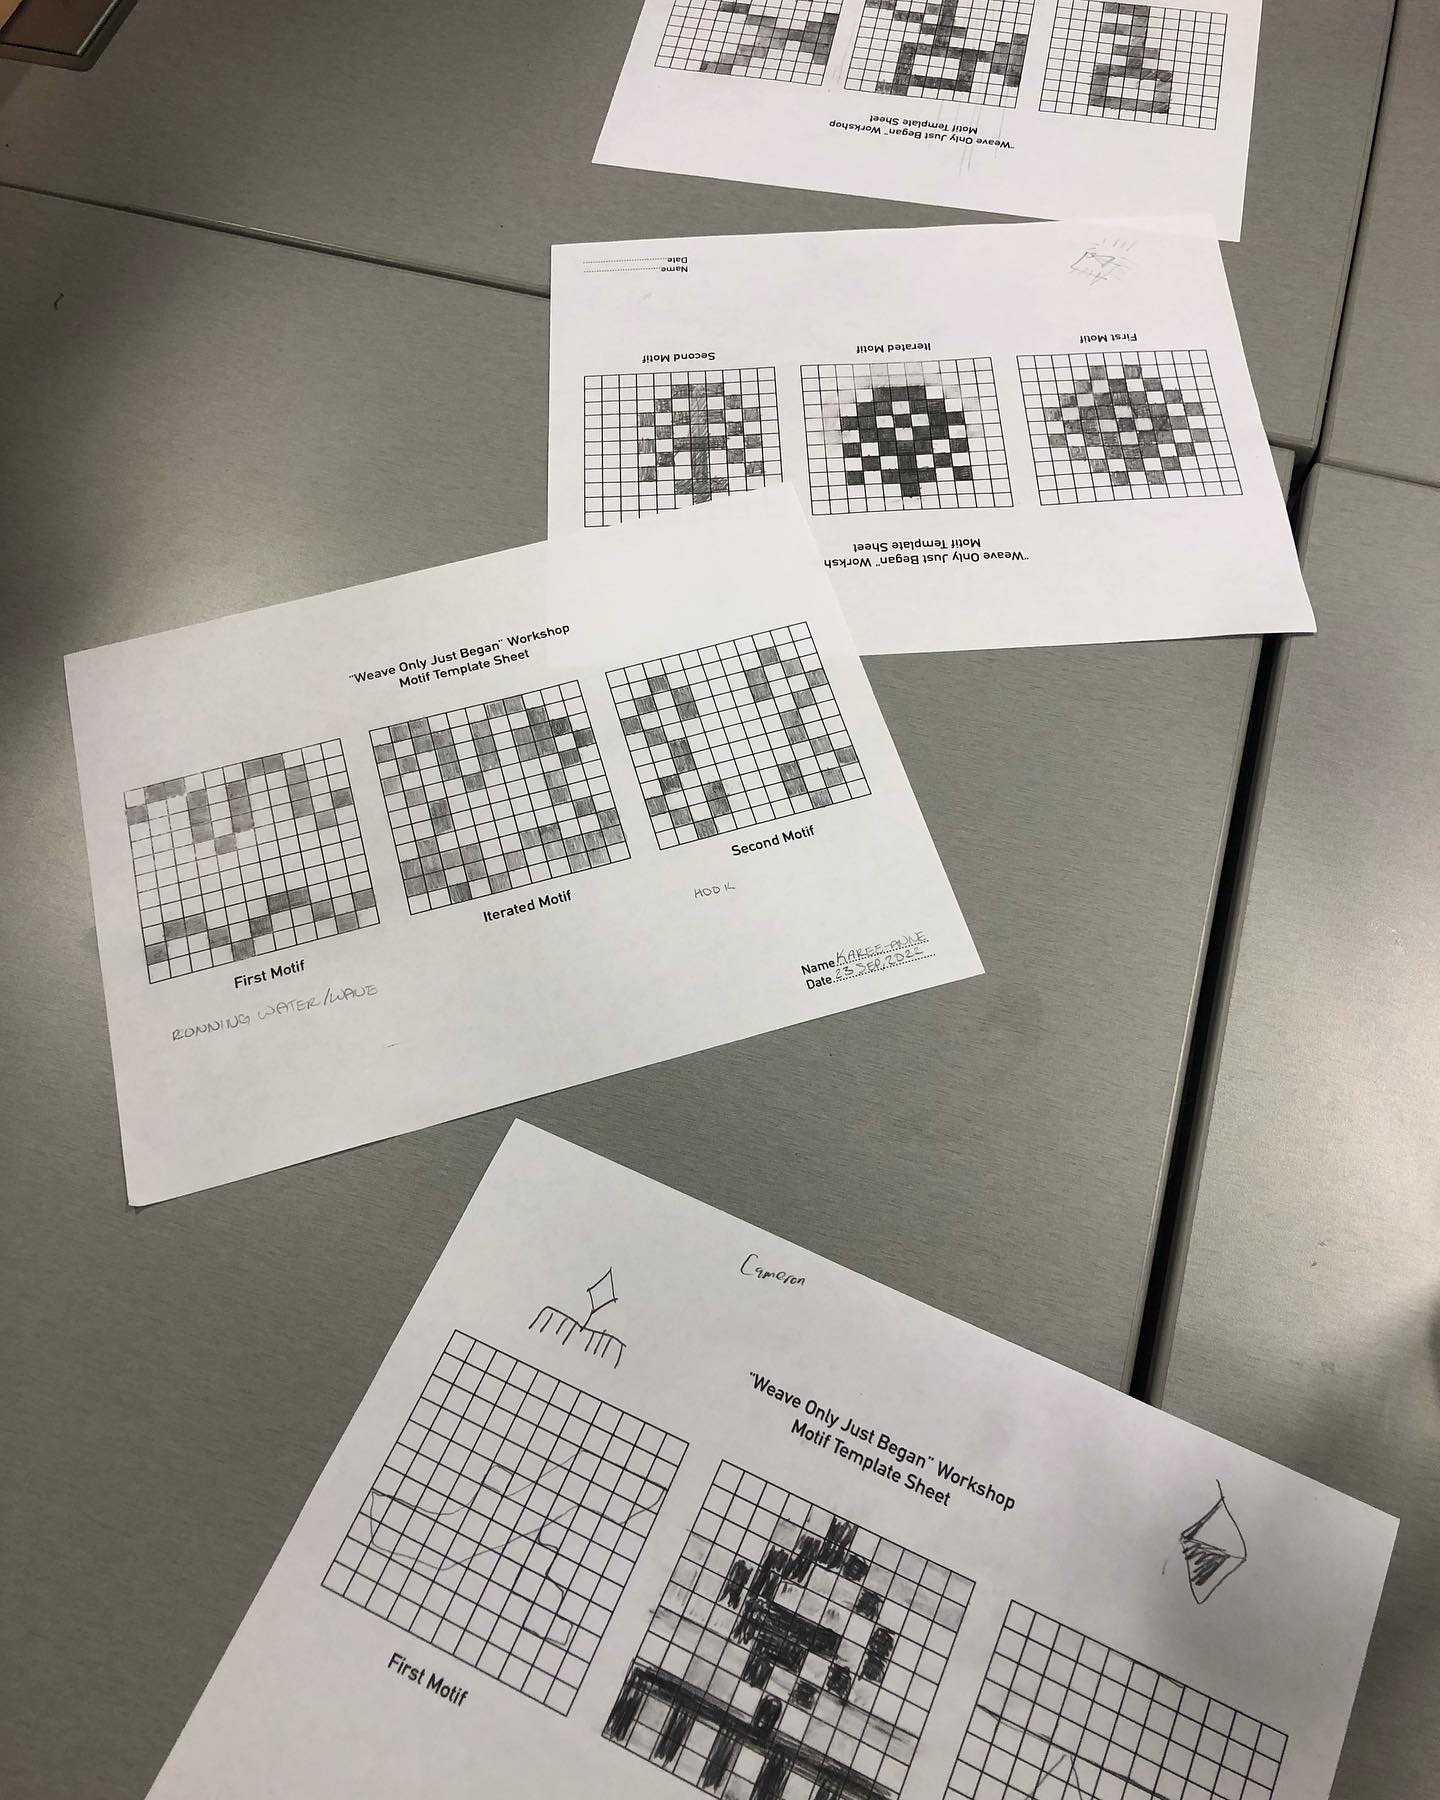 Printed grids with blocks filled in to form patterns